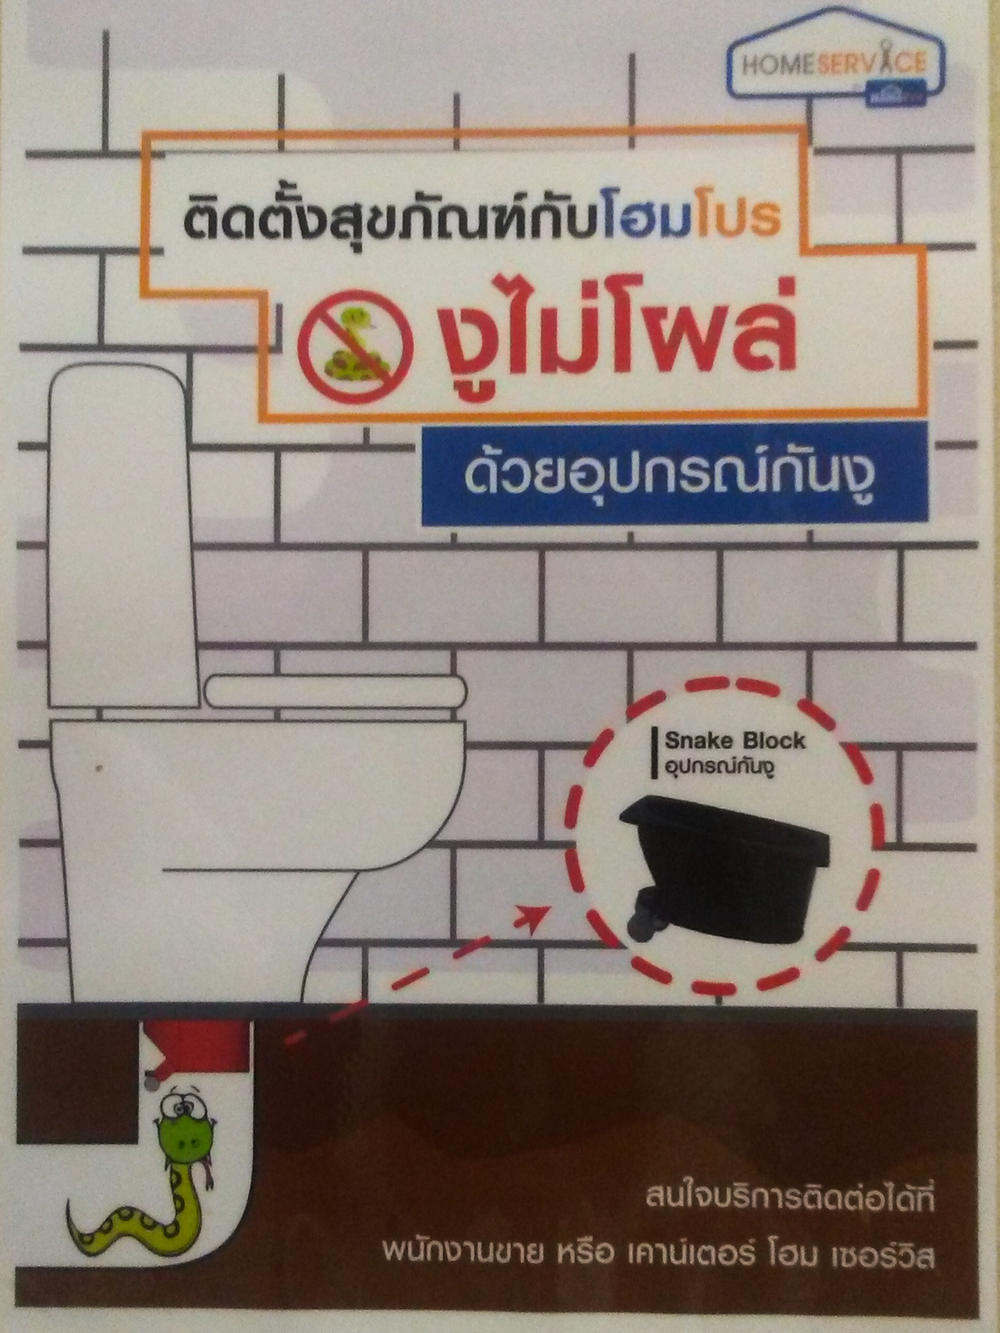 A home improvement store in Thailand offered this dire picture of toilet hazards — and a solution.